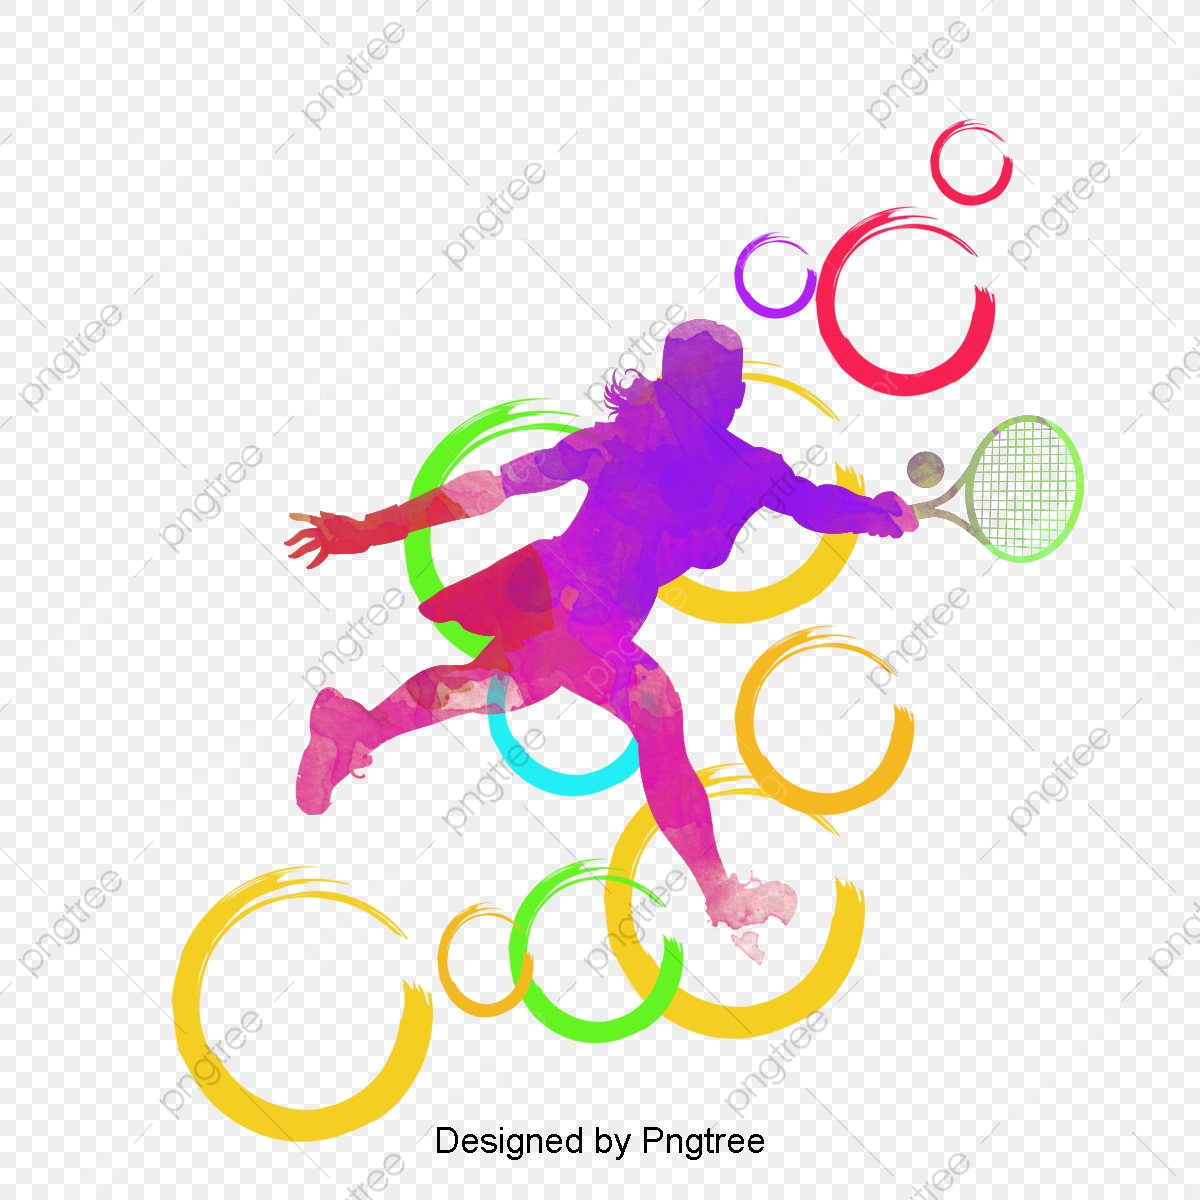 Badminton sports movement background. Olympic clipart sport competition